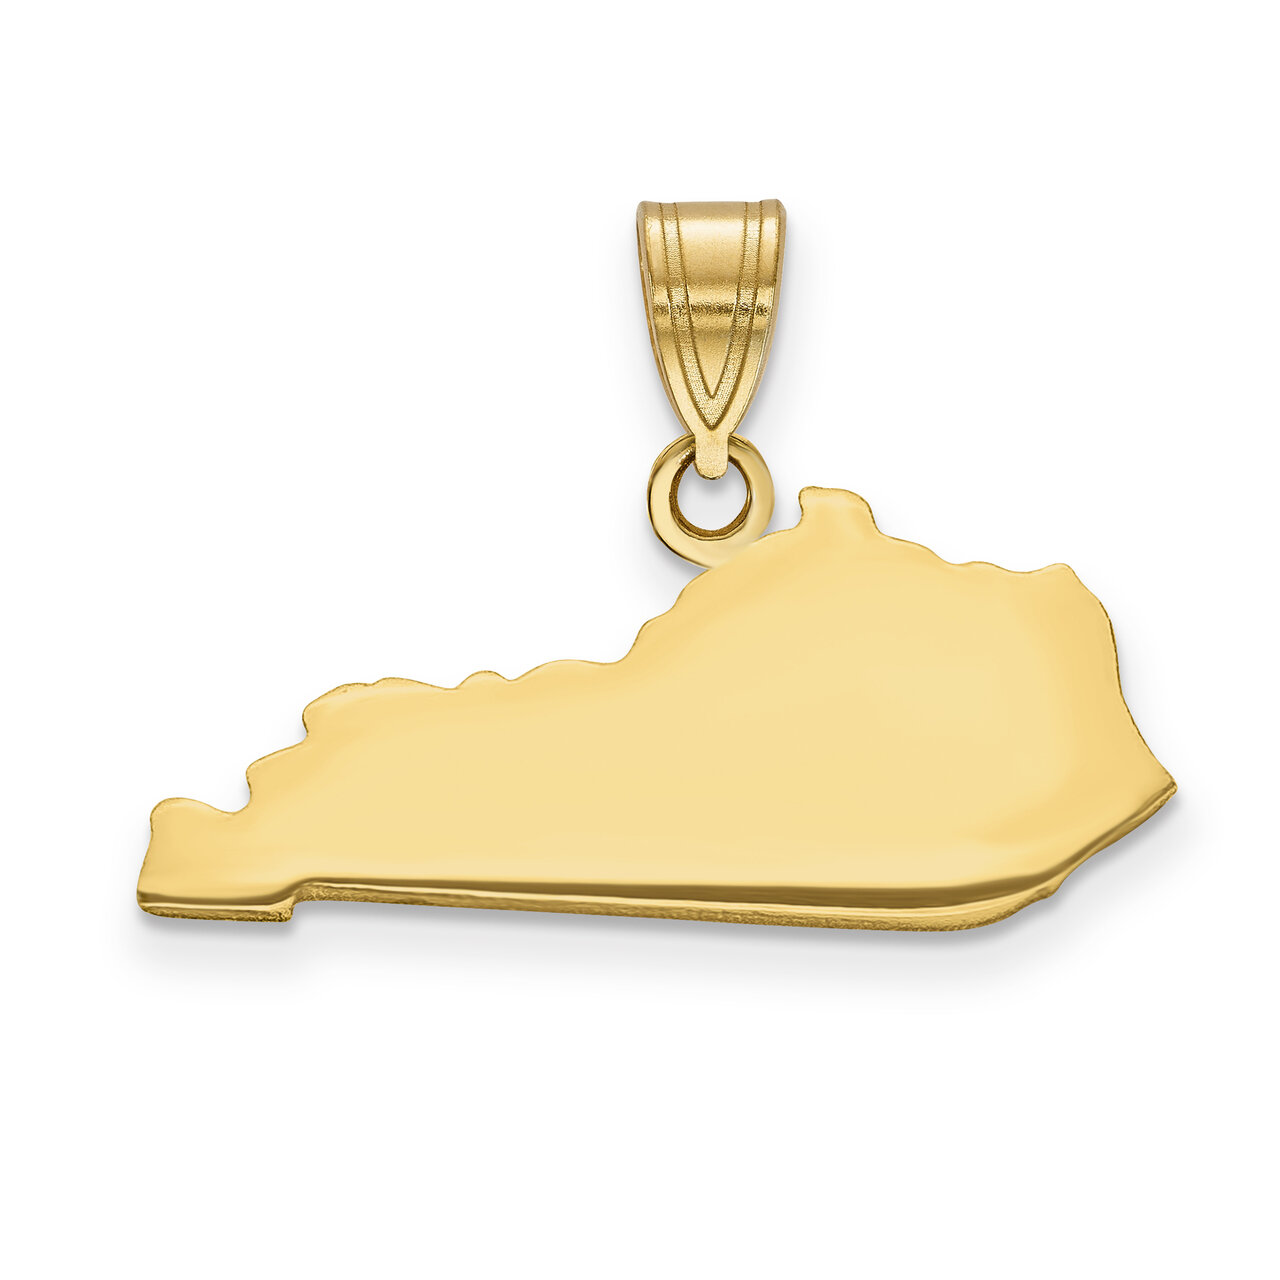 Kentucky State Pendant Charm 14k Yellow Gold Engravable XNA707Y-KY